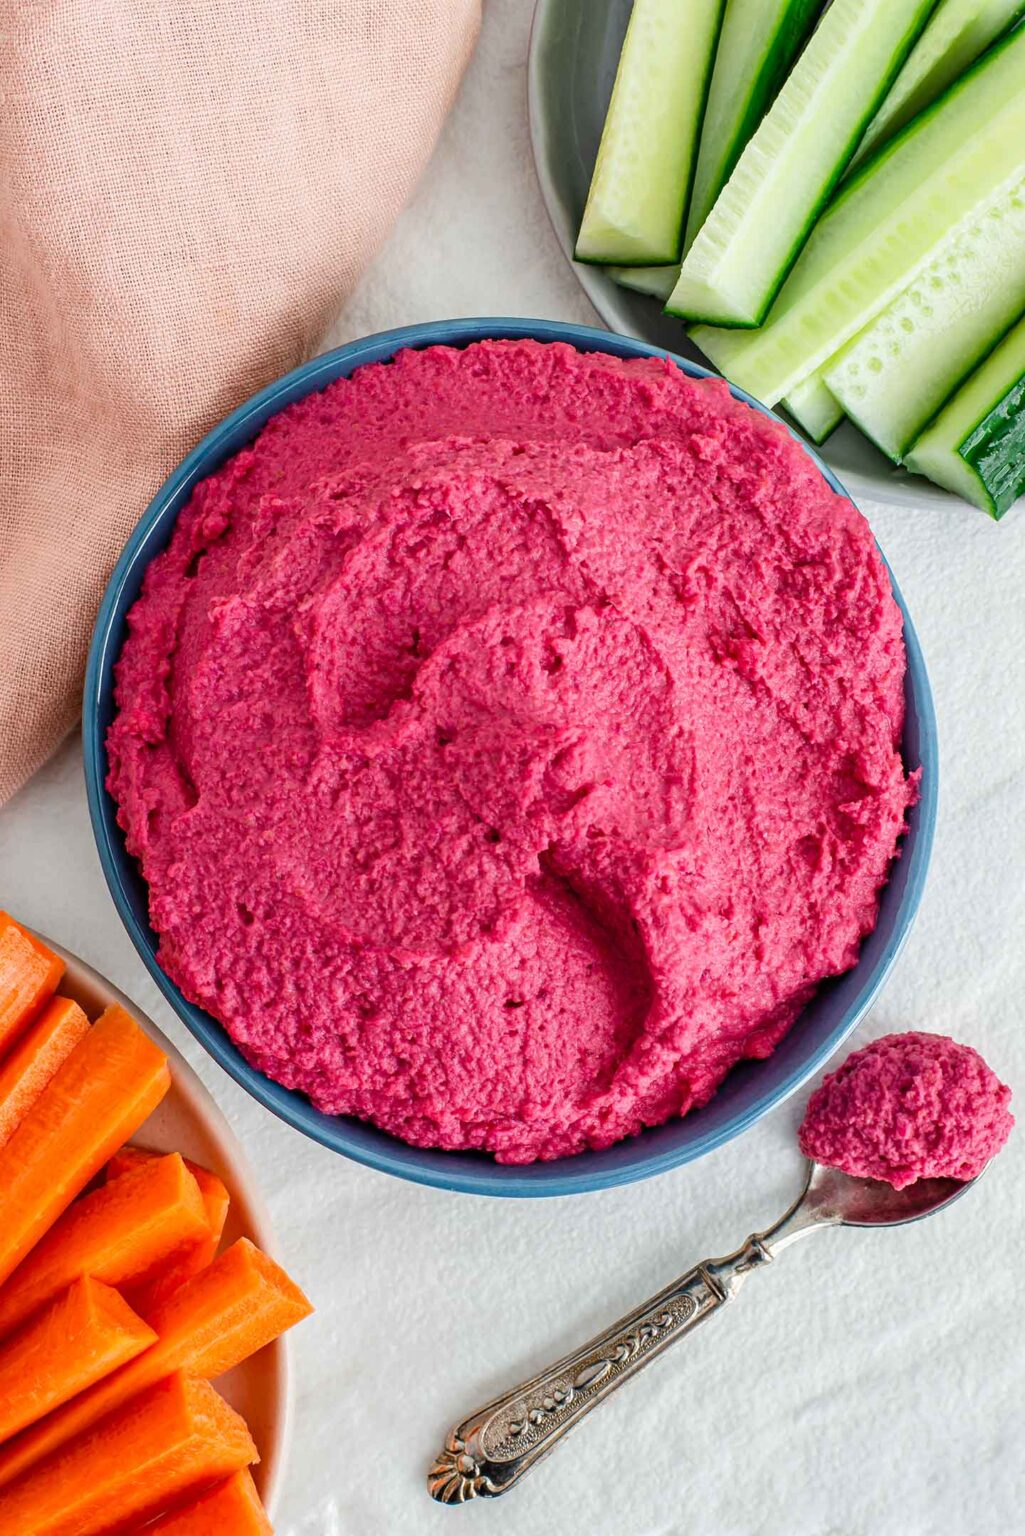 Easy Roasted Beet Hummus Recipe To Brighten Your Plate • Tasty Thrifty Timely